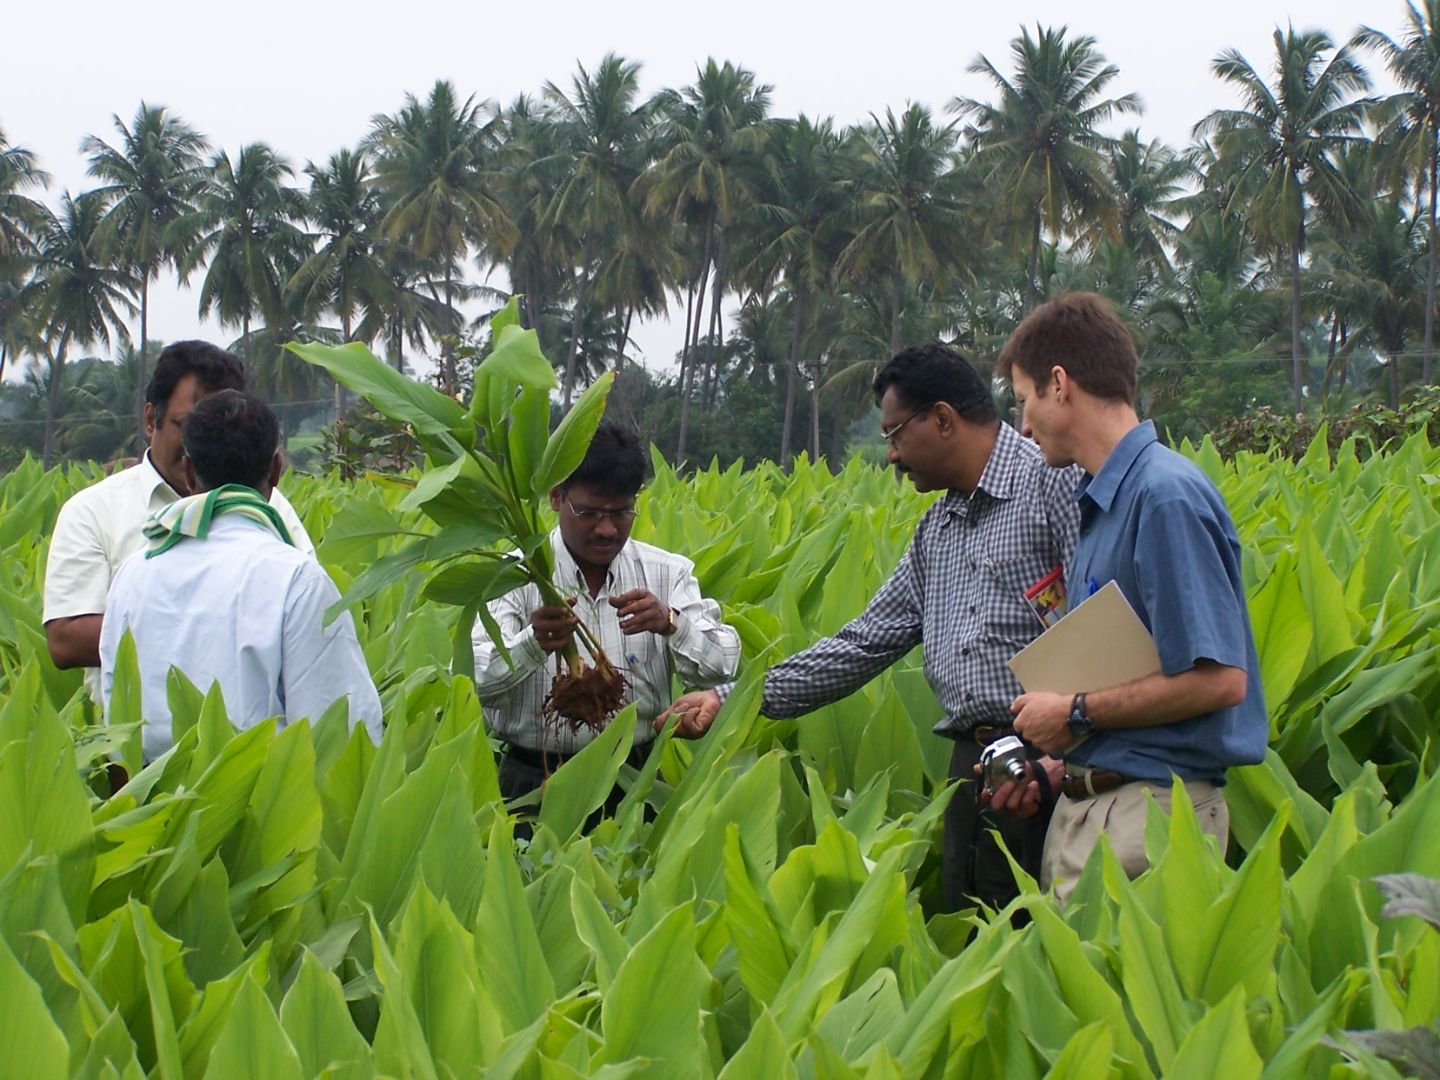 Five people stand in a crop field examining large green leaves.